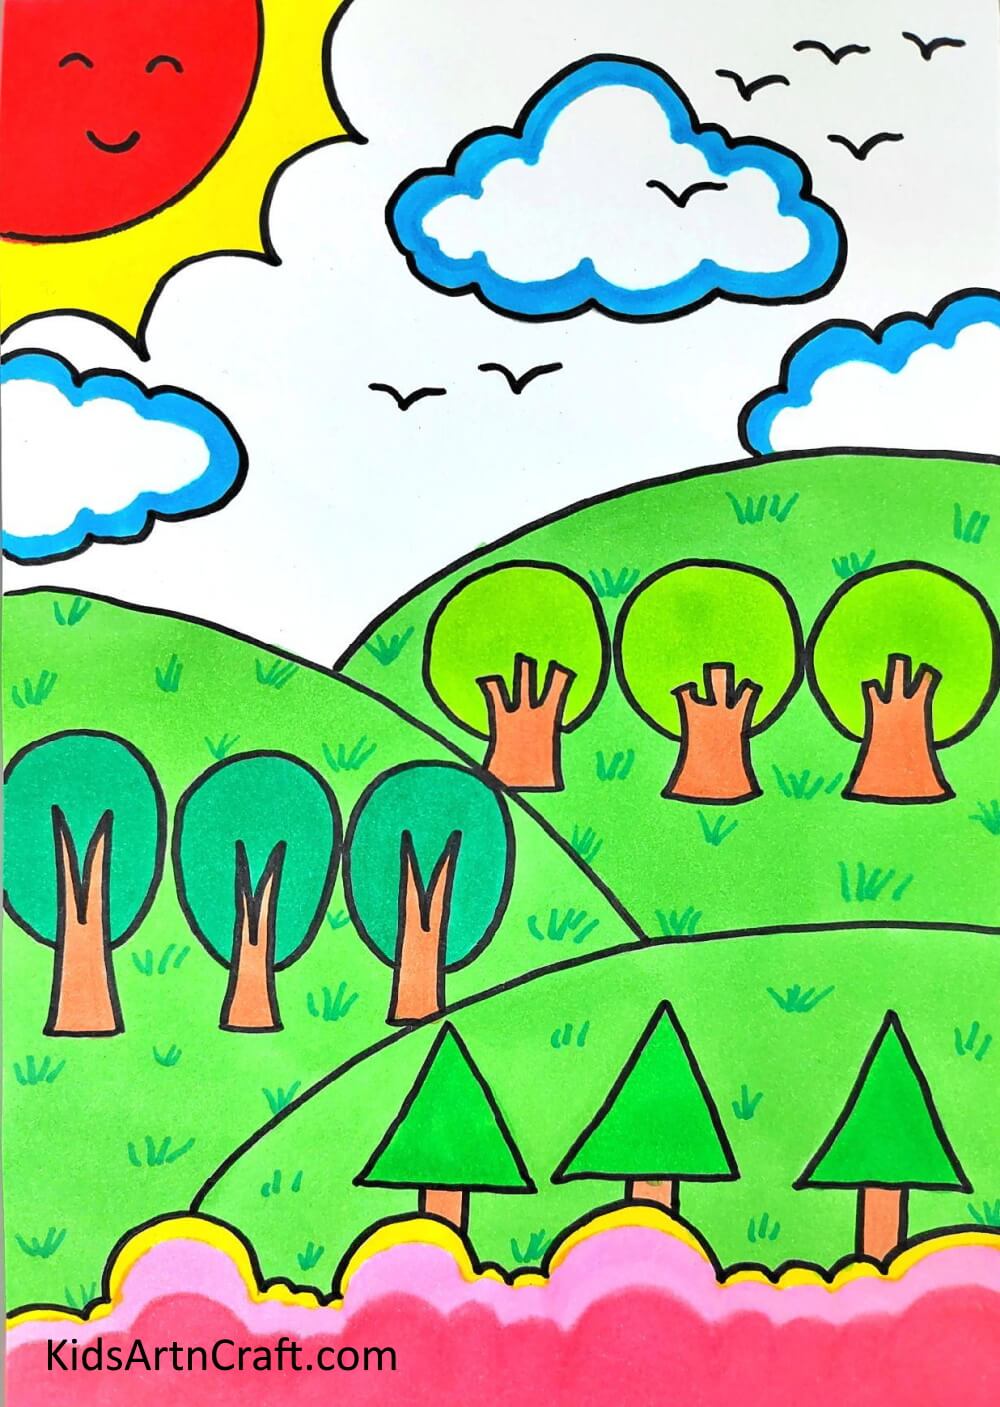 This Is The Final Look Of Our Landscape Art! - Step-by-Step Guide for Drawing a Landscape for Kids